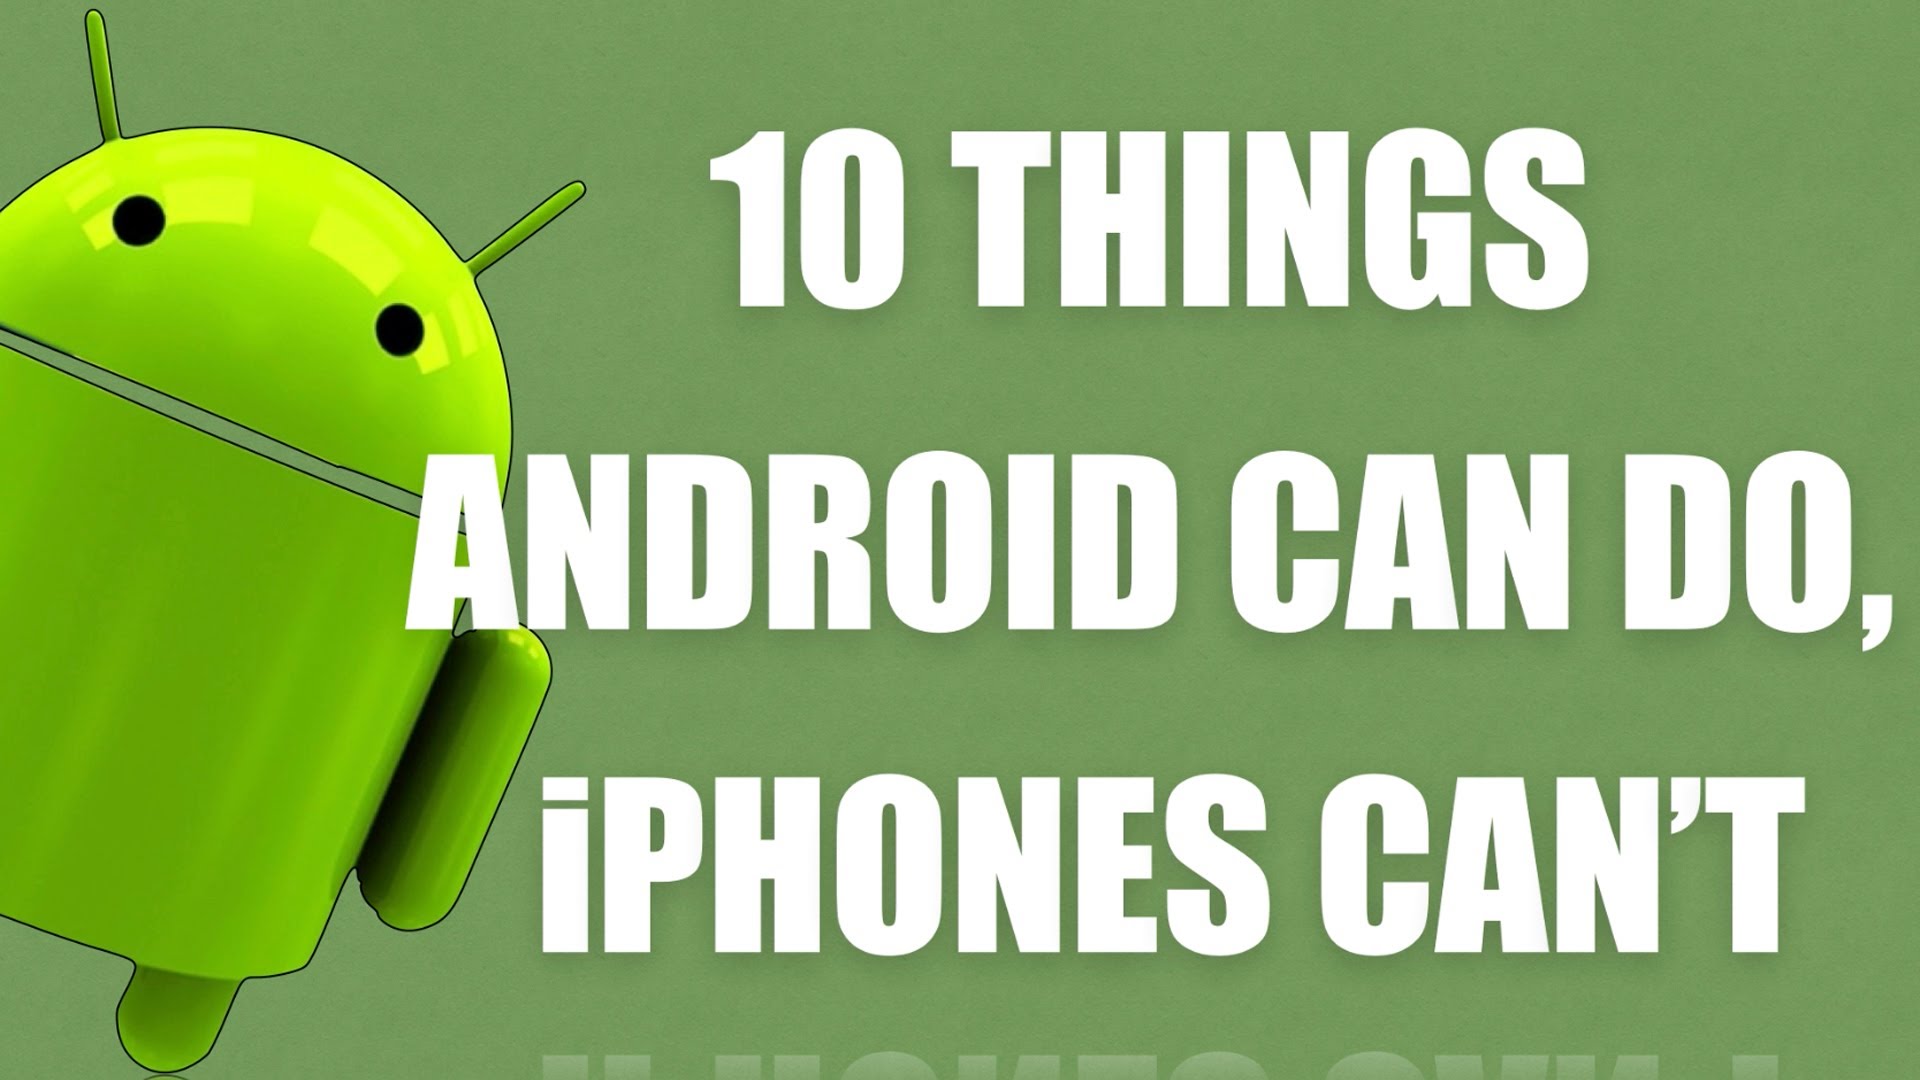 10 Things That Android Mobile Can Do But Iphone Cannot RVCJ Media